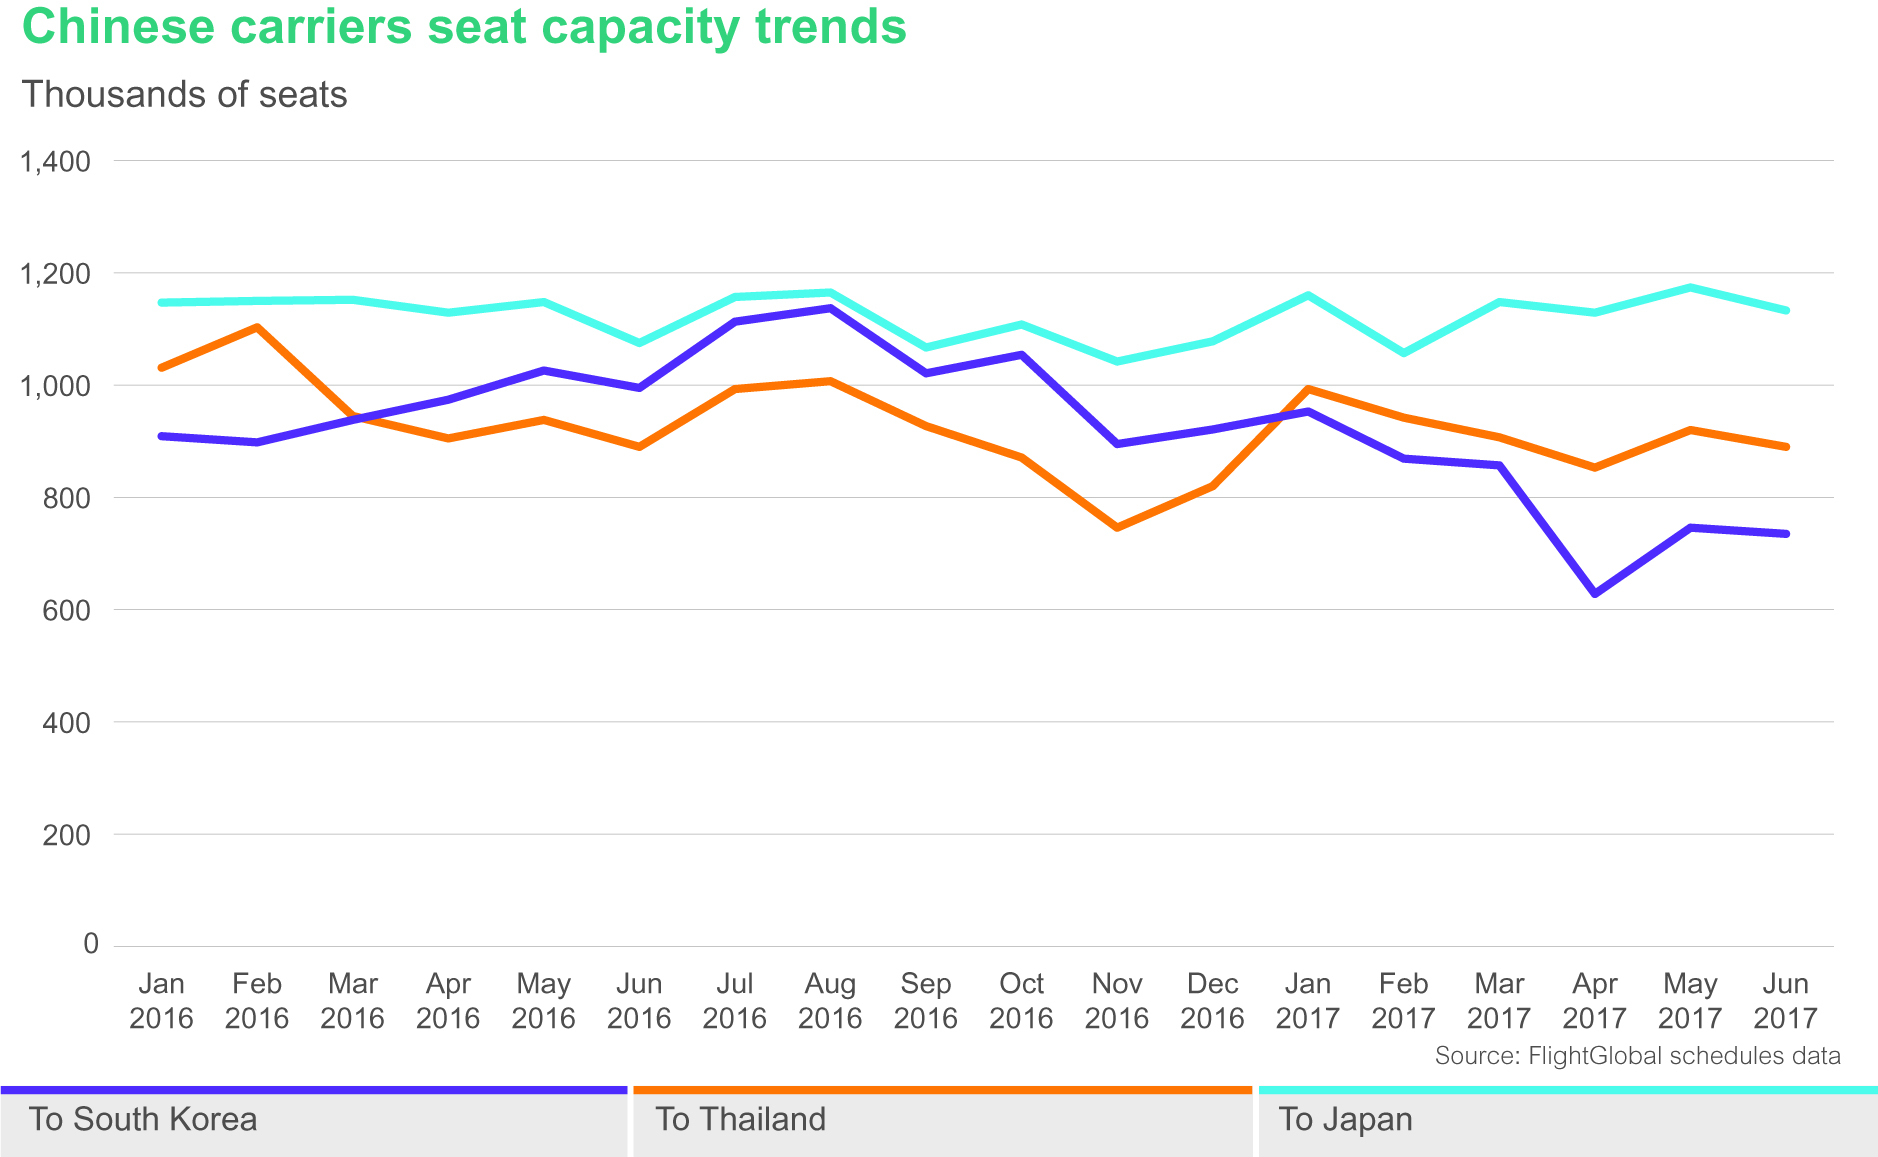 Chinese carriers' seat capacity trends